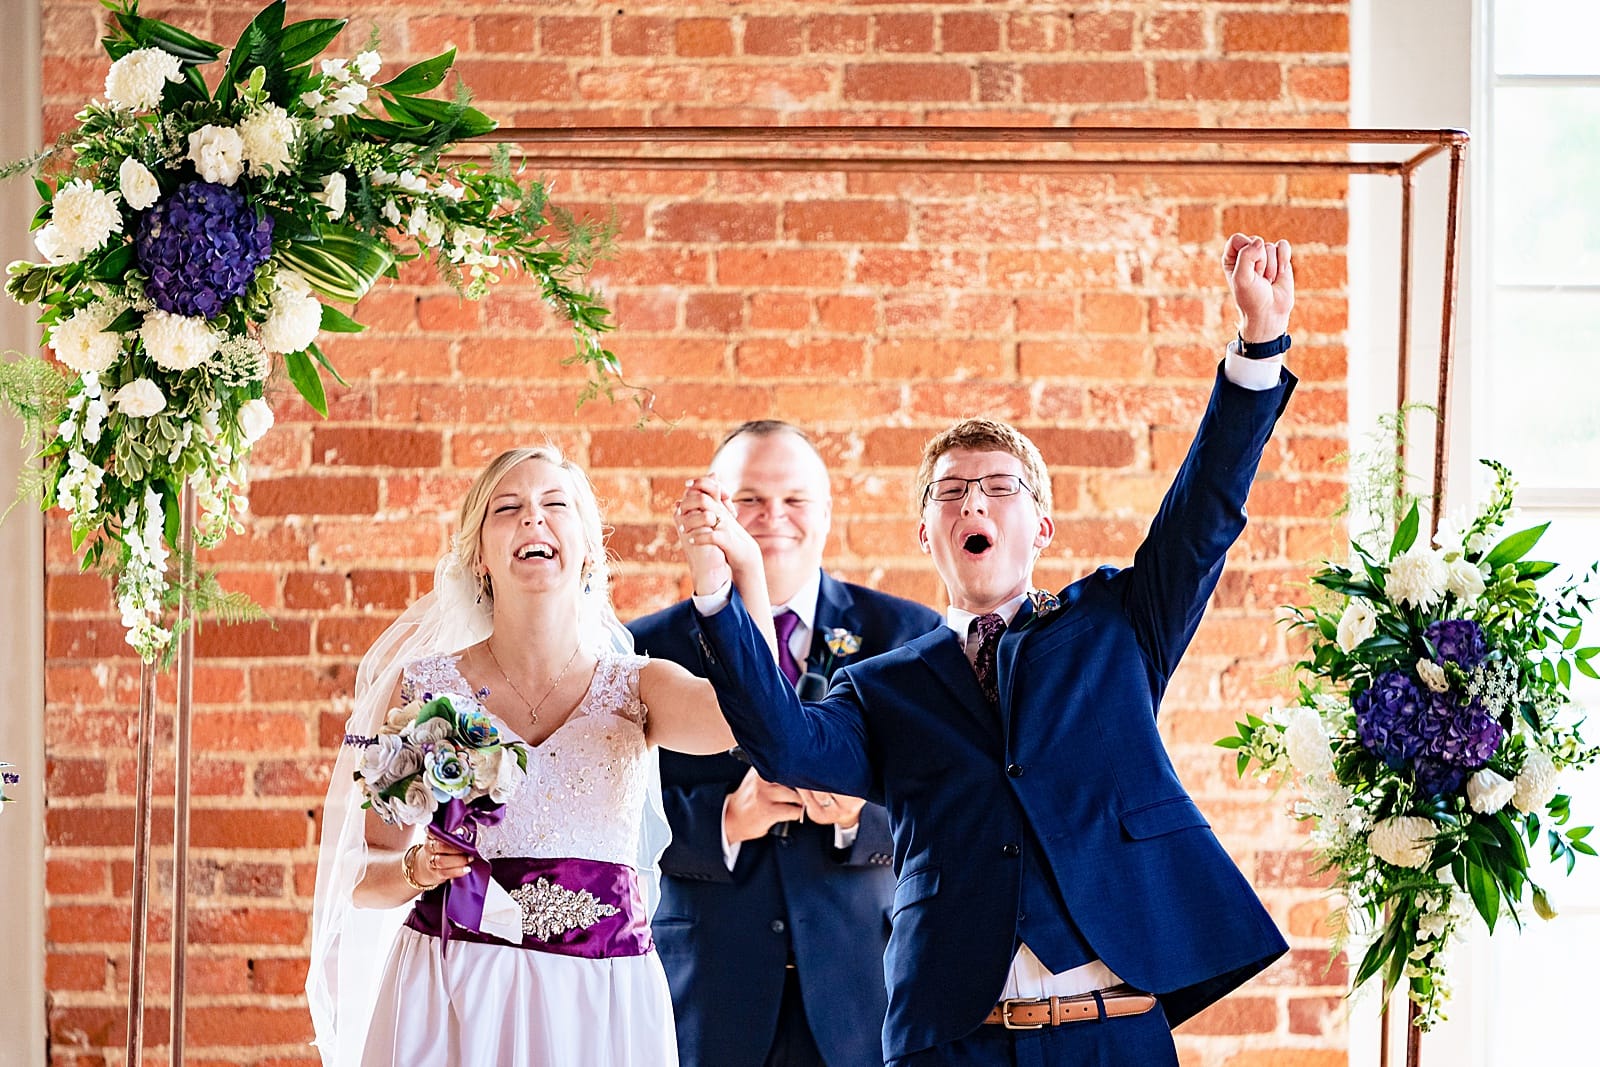 This couple is ecstatic to be married